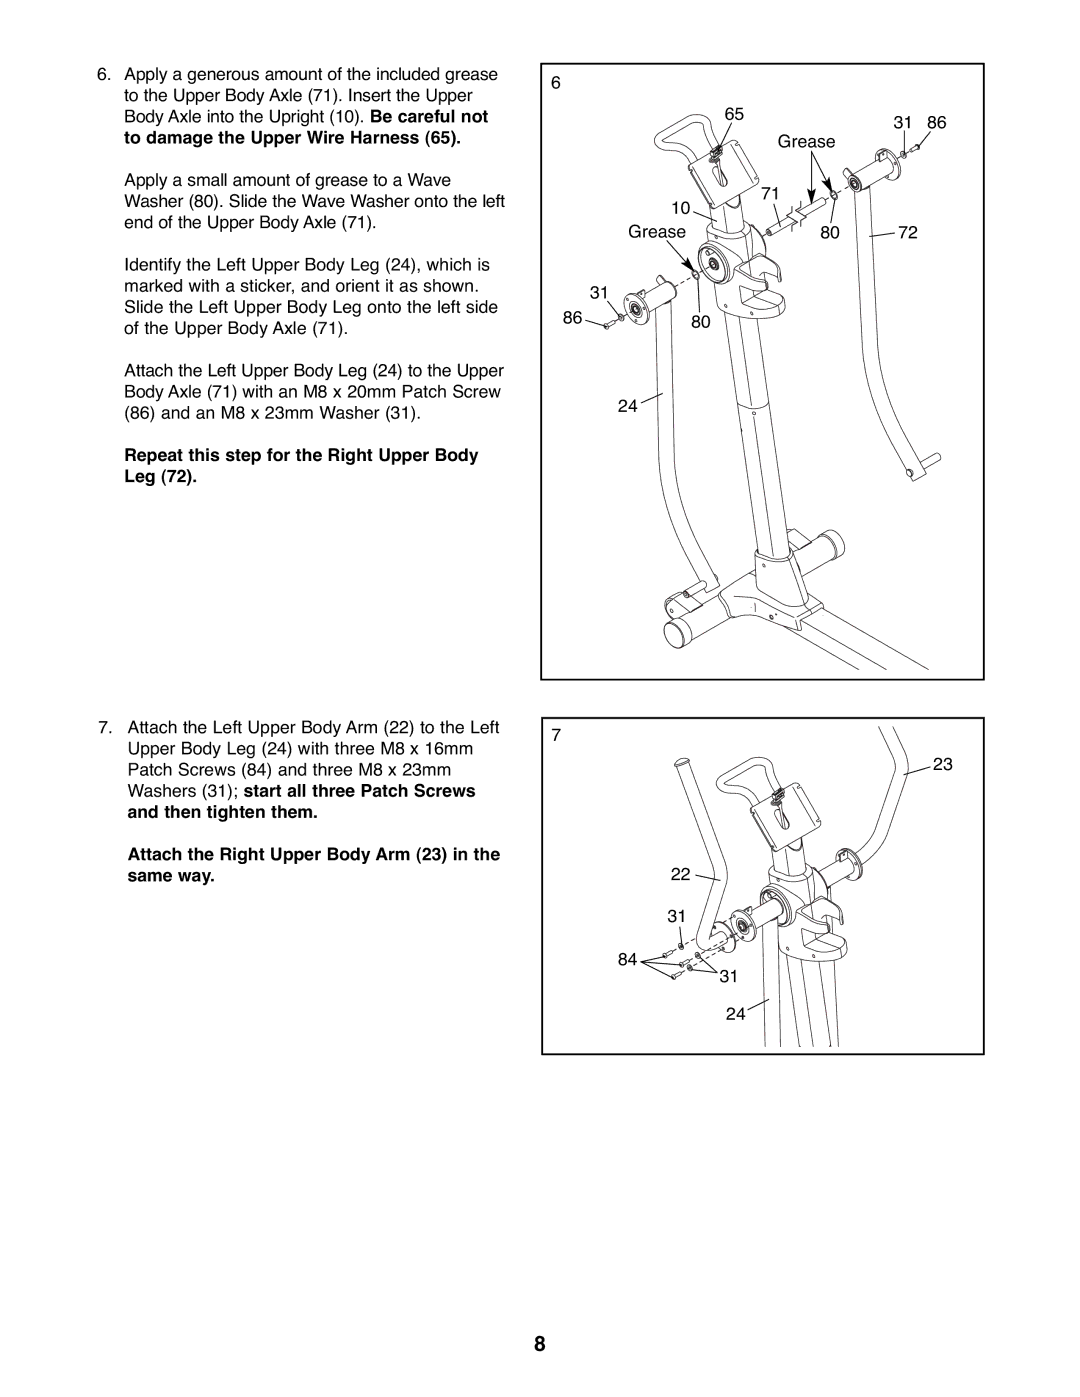 NordicTrack NTEL7506.2 user manual To damage the Upper Wire Harness, Repeat this step for the Right Upper Body Leg 